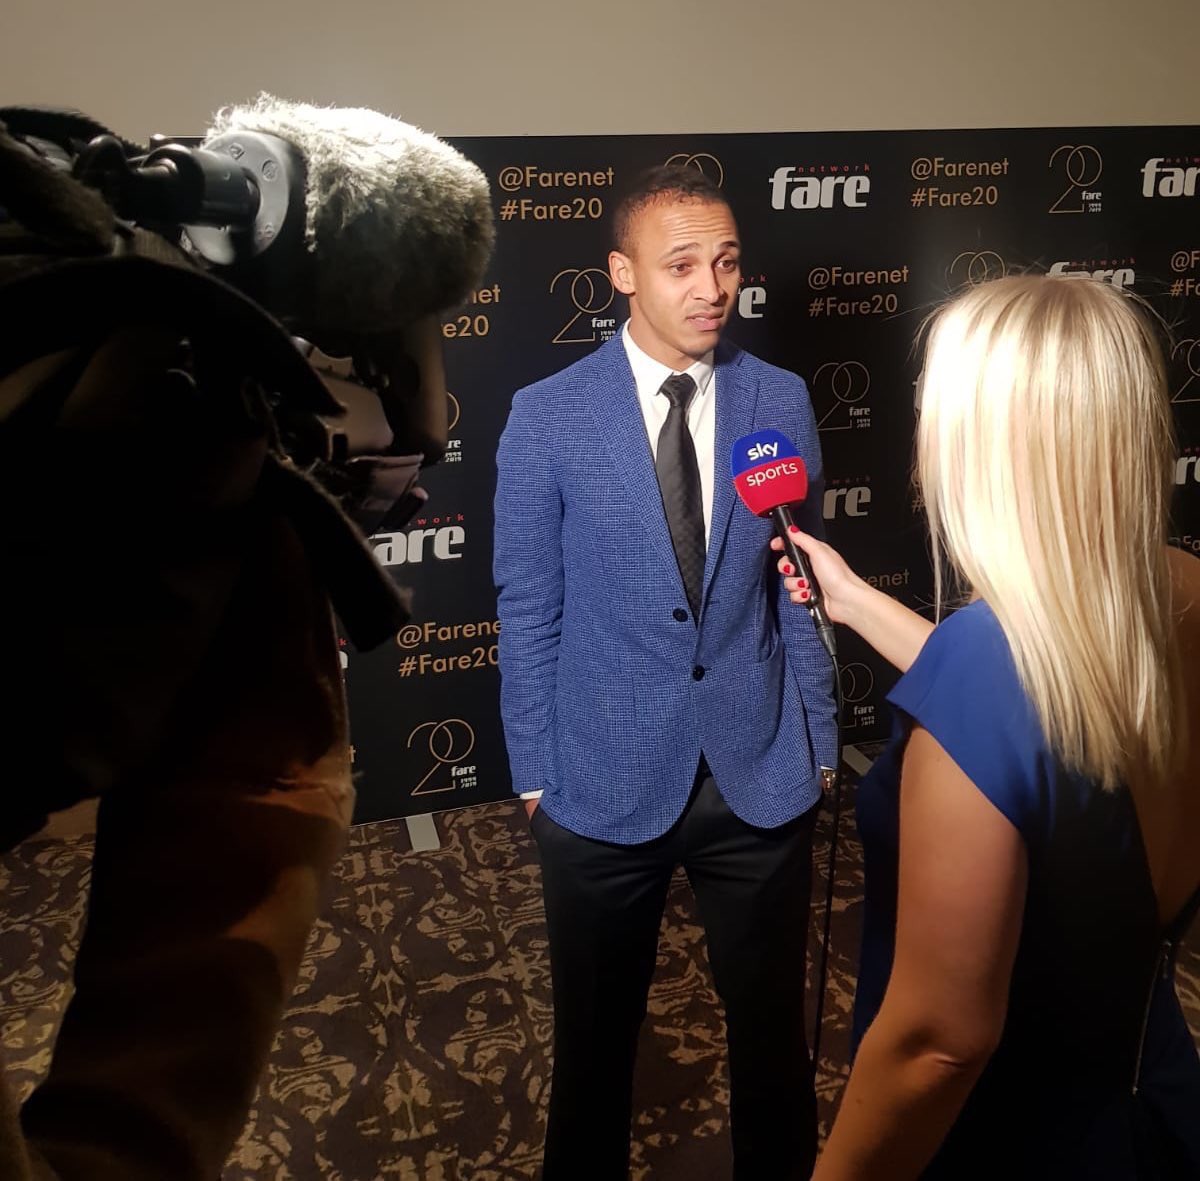 Osaze Odemwingie announced his retirement at  UEFA event at Wembley on Wednesday  (Twitter/Osaze Odemwingie)